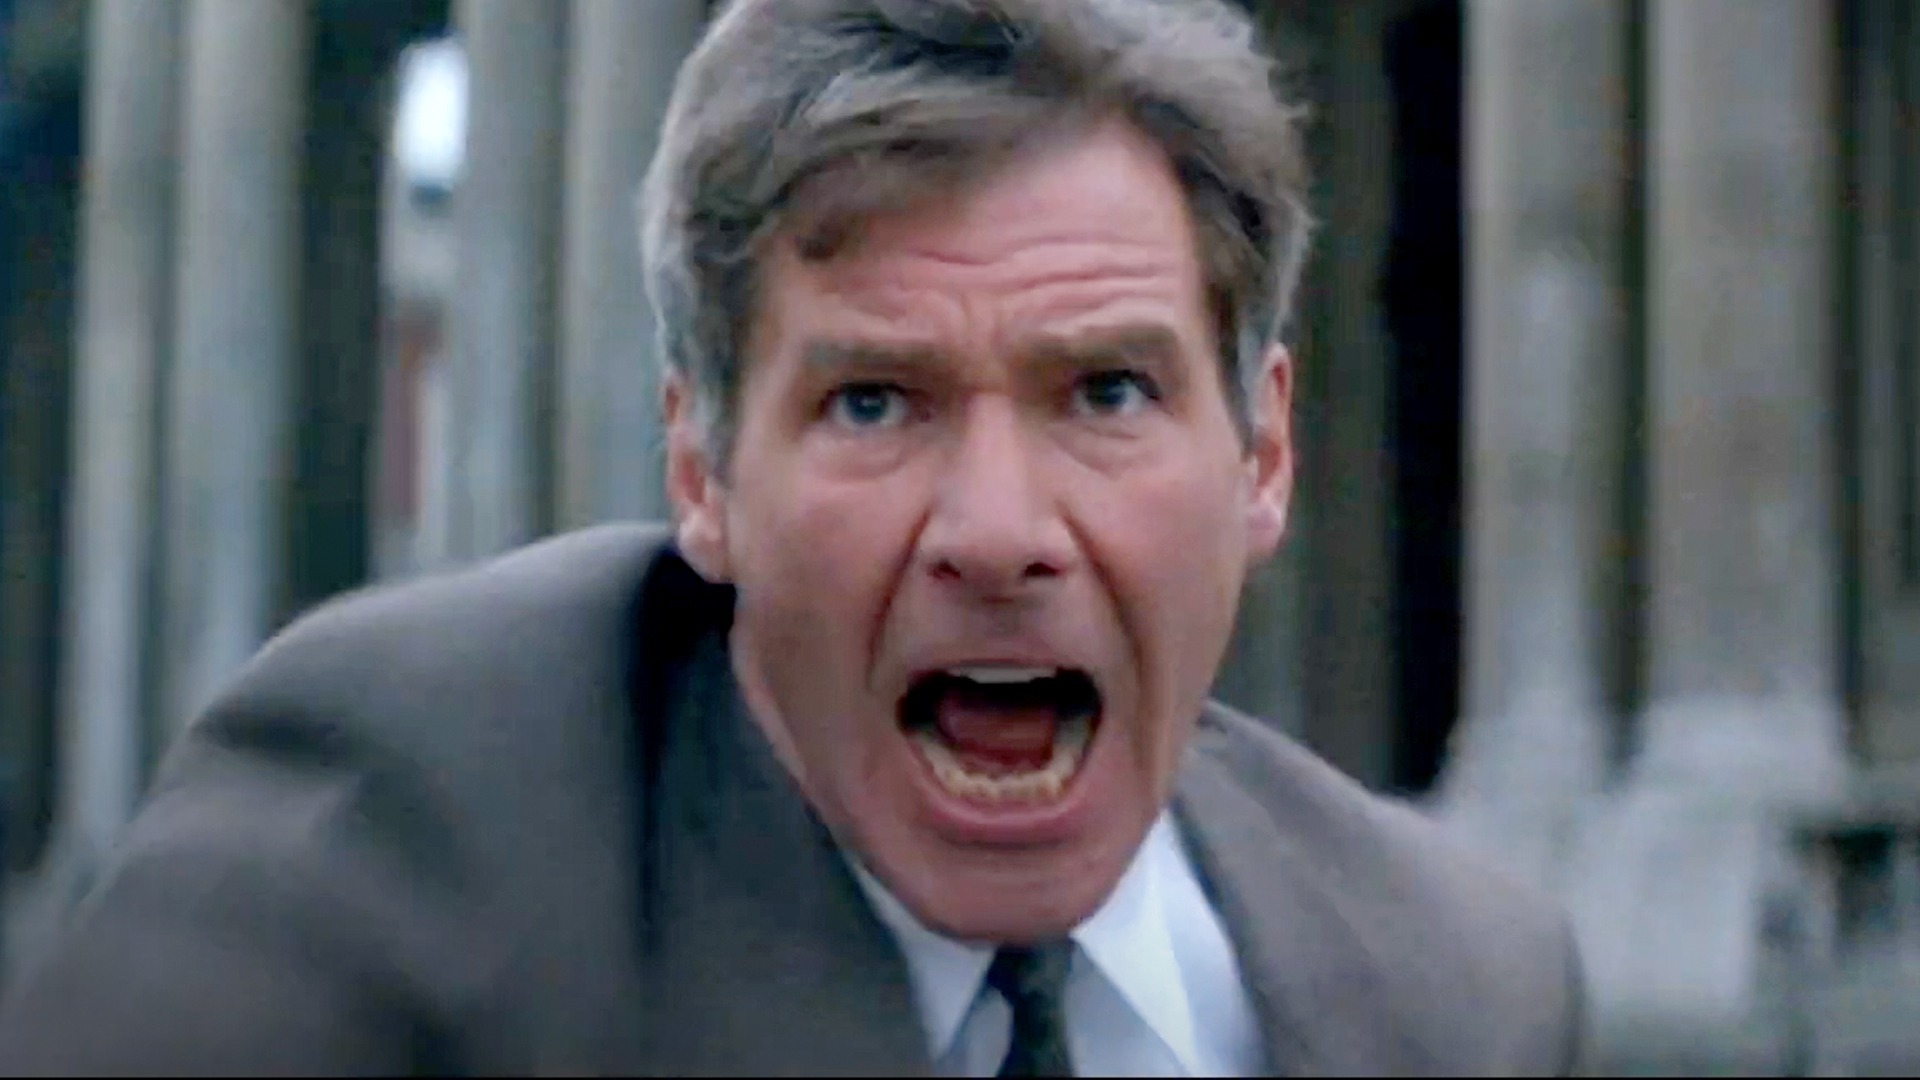 Patriot Games Trailer 1 Trailers & Videos Rotten Tomatoes